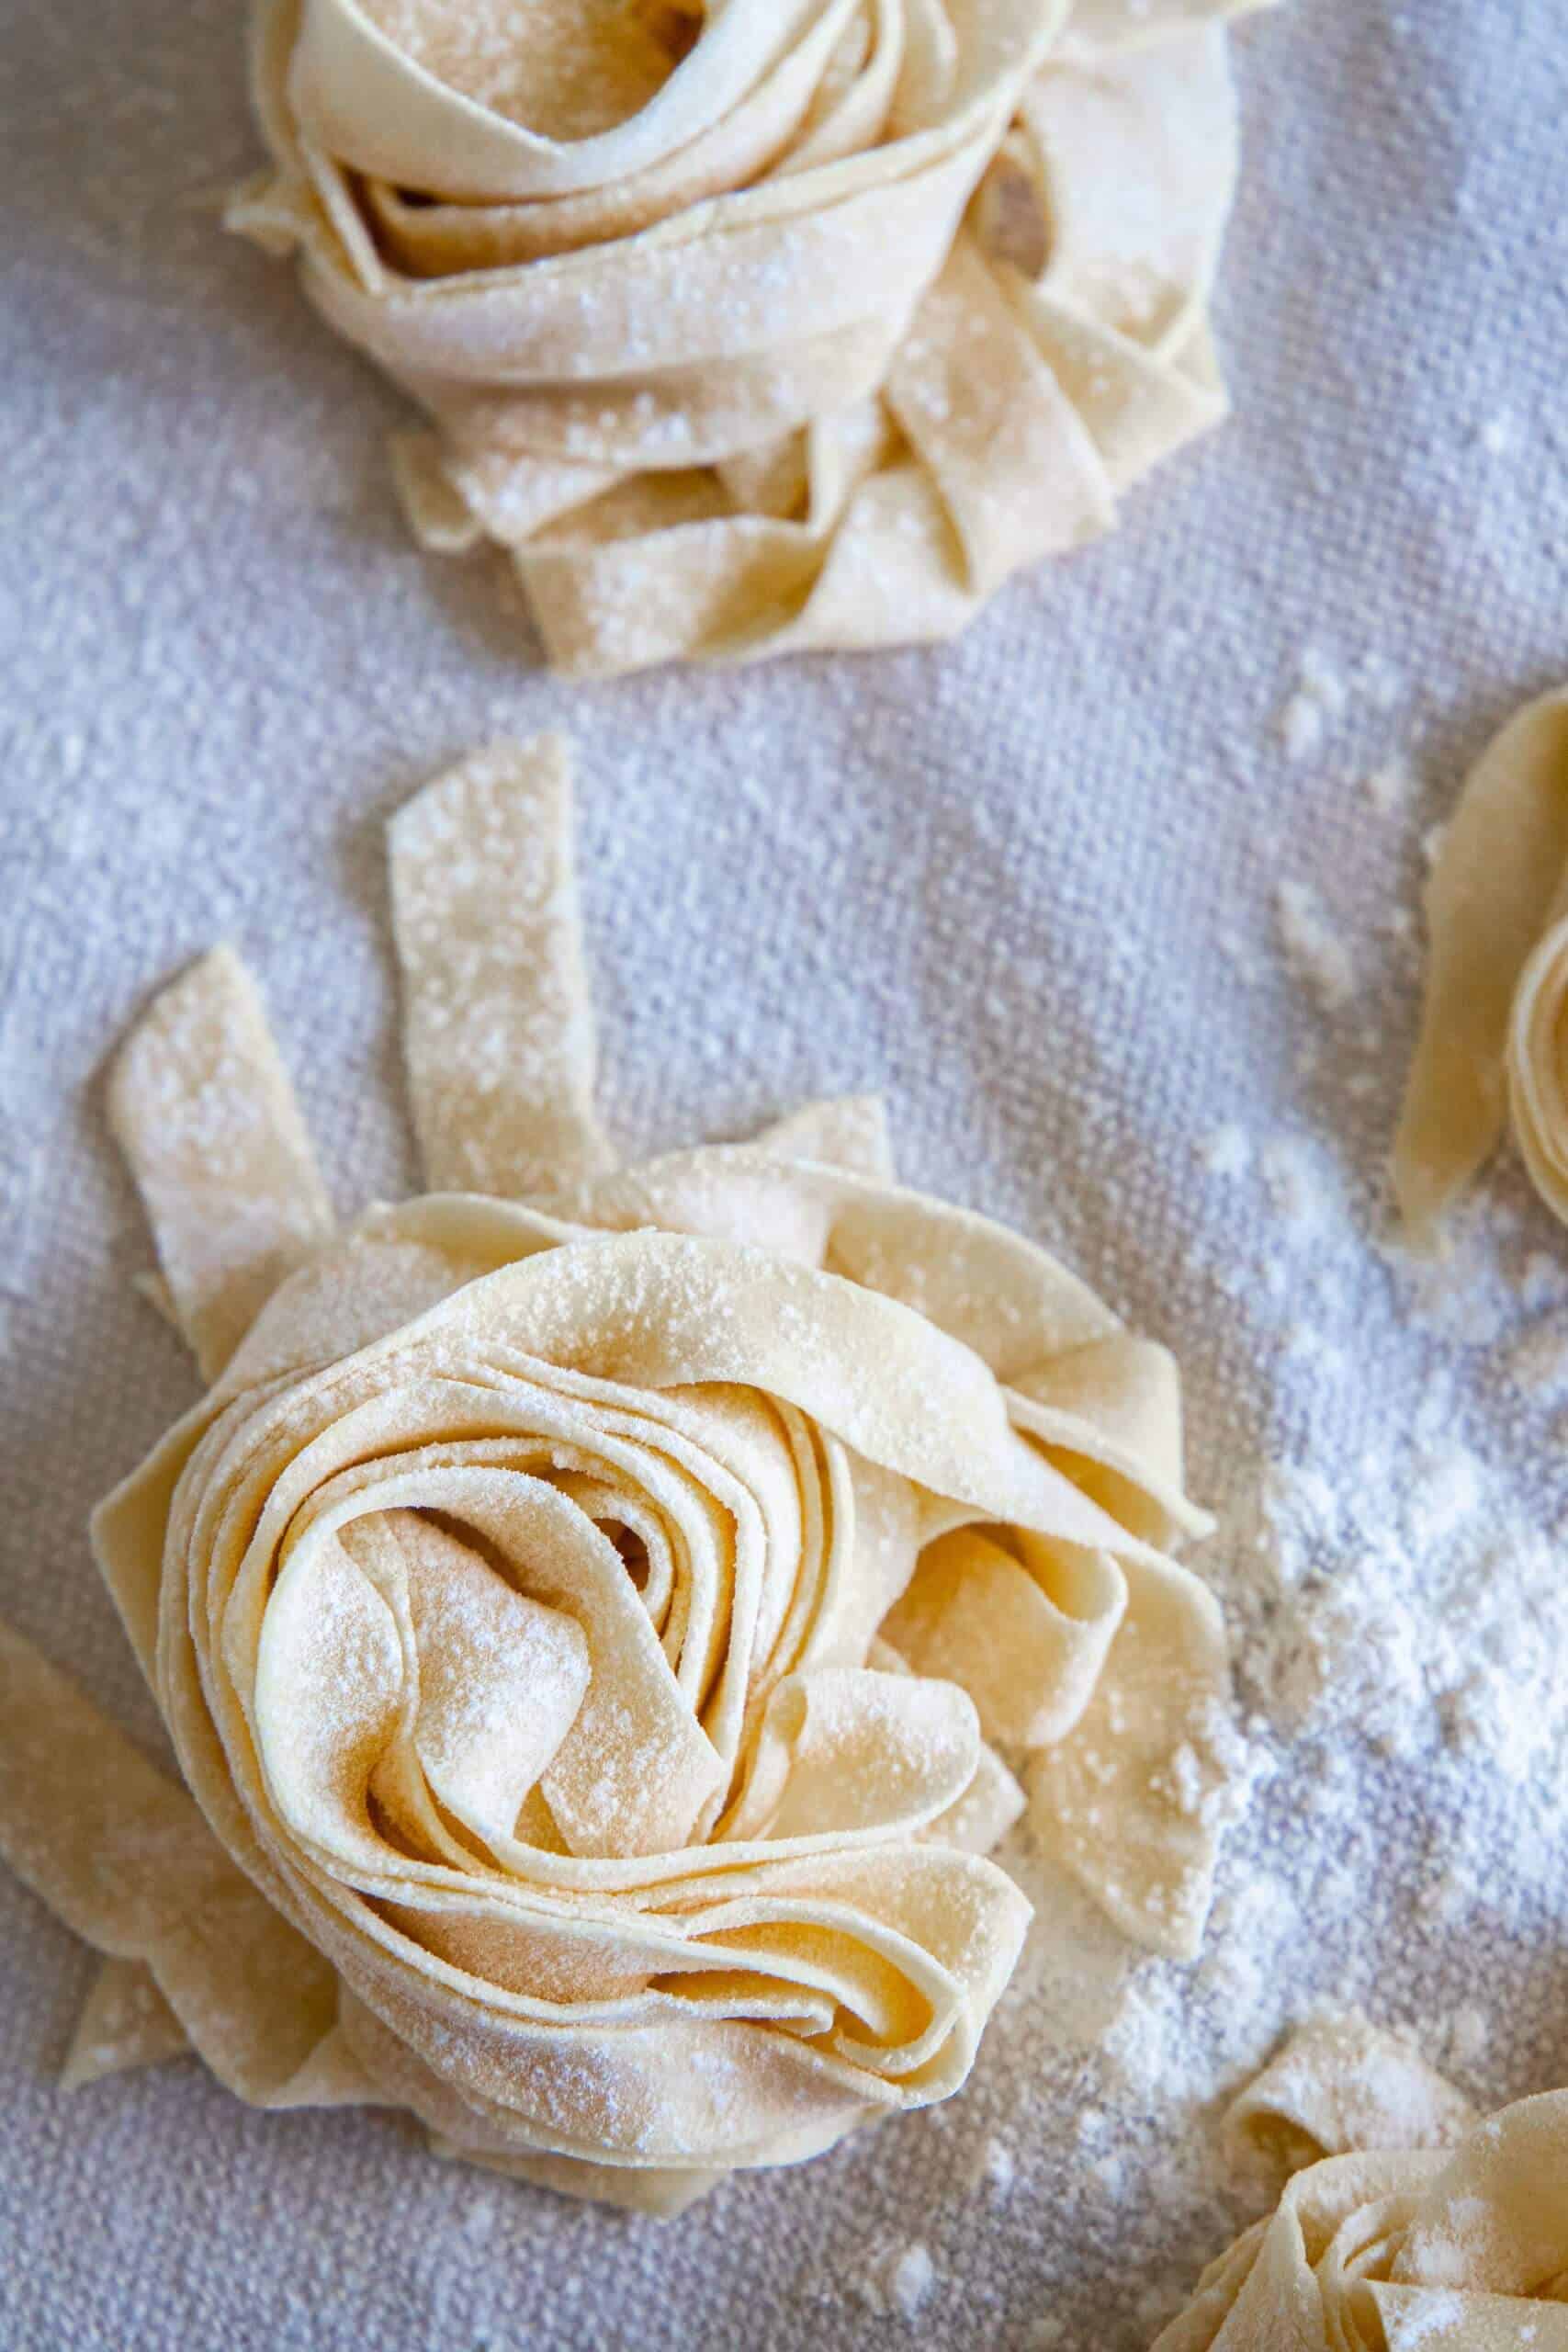 Fettuccine with a rose on a baking sheet.